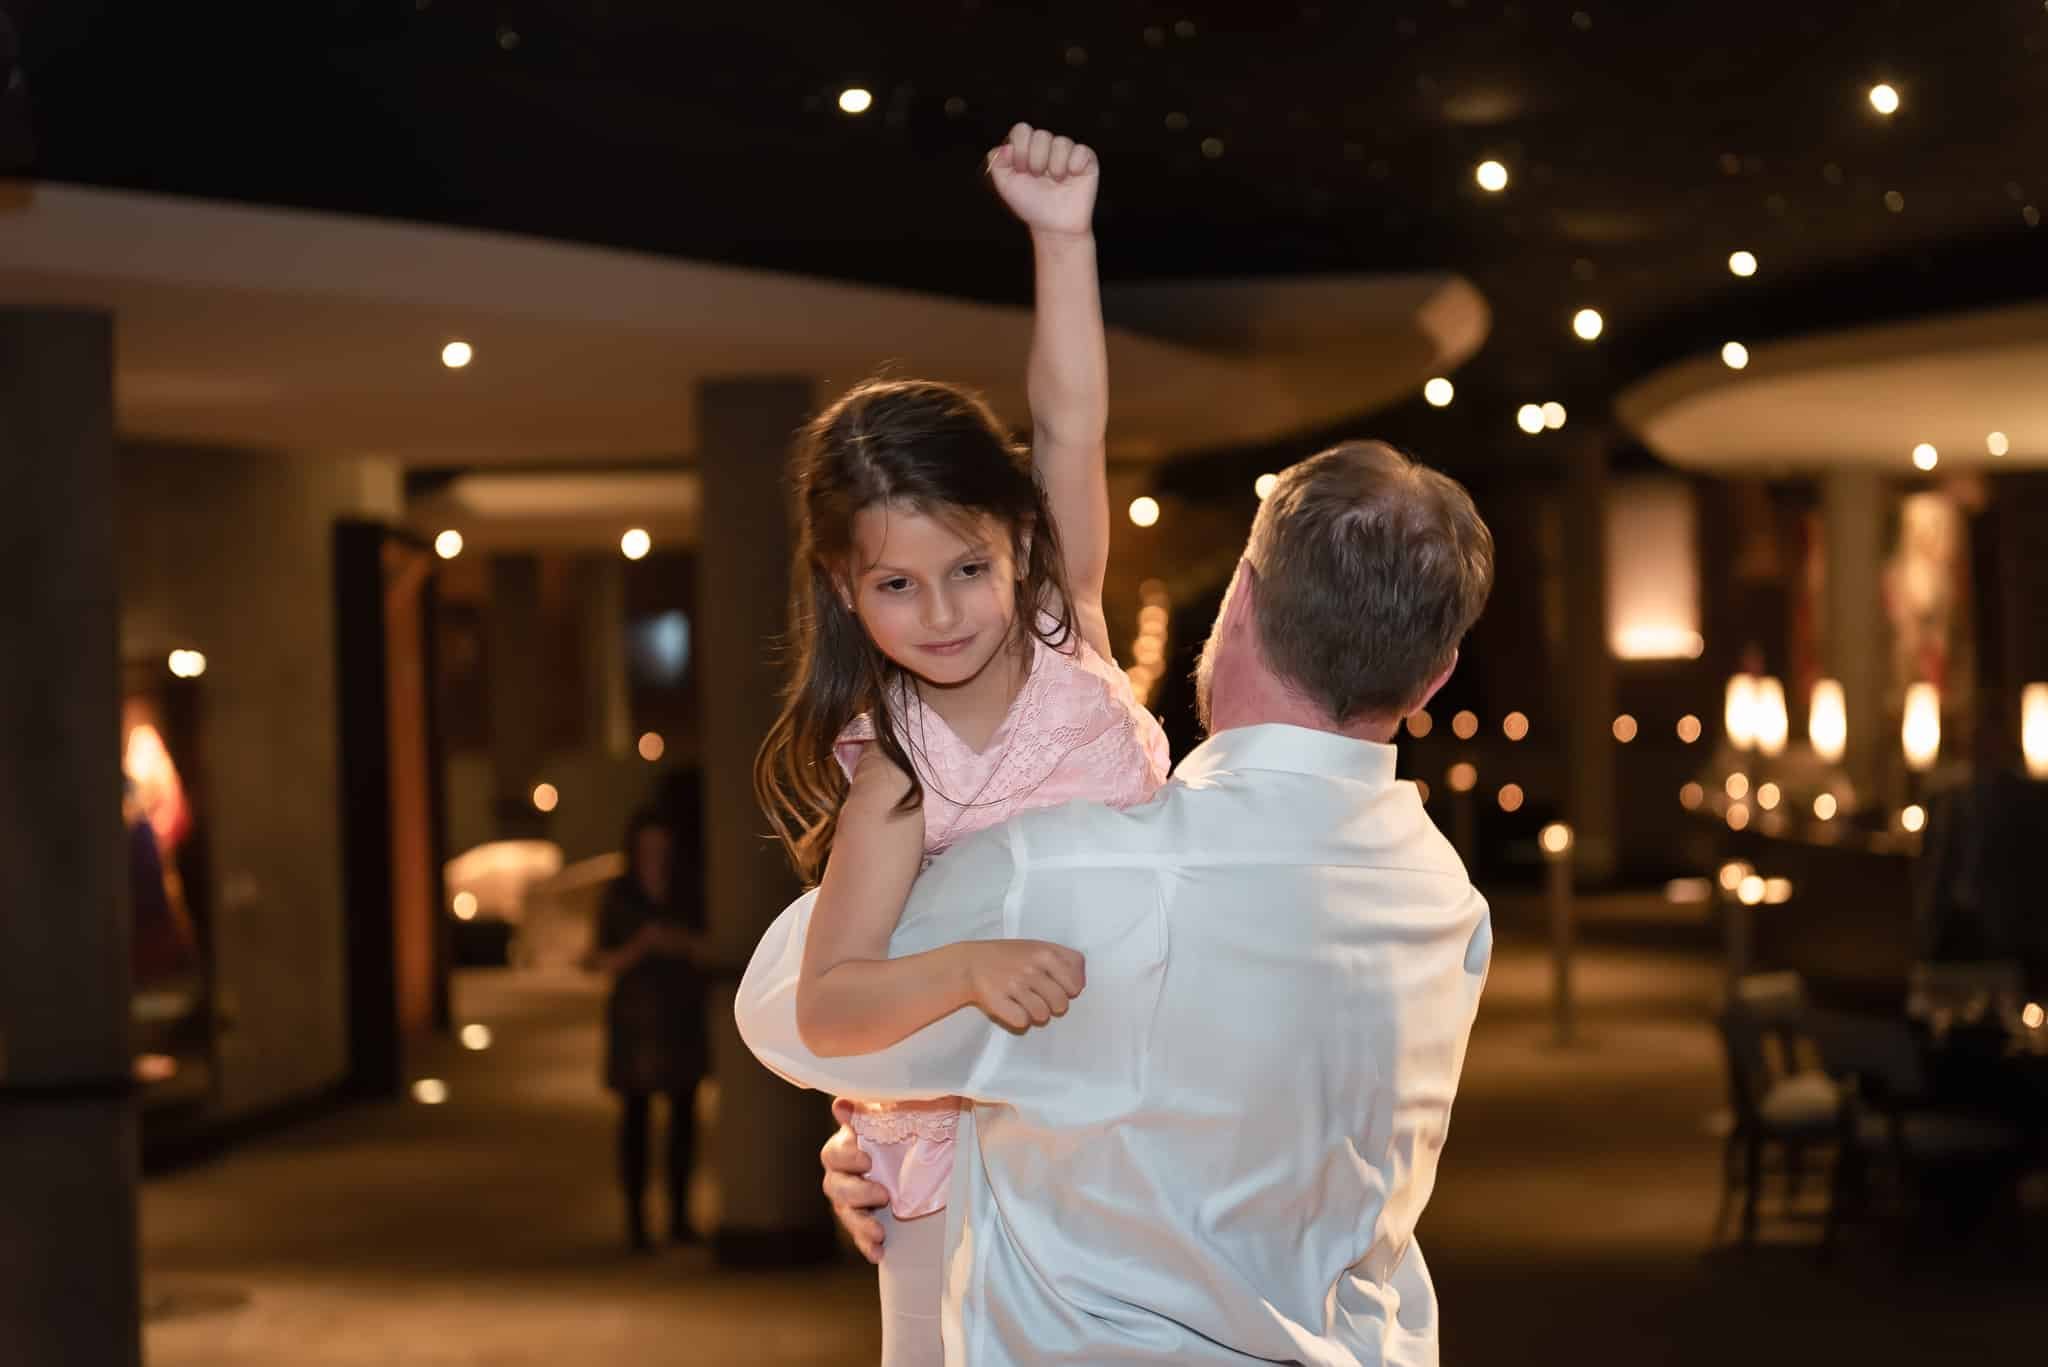 A young girl dances with the groom at the wedding reception and raises her fist in victory.